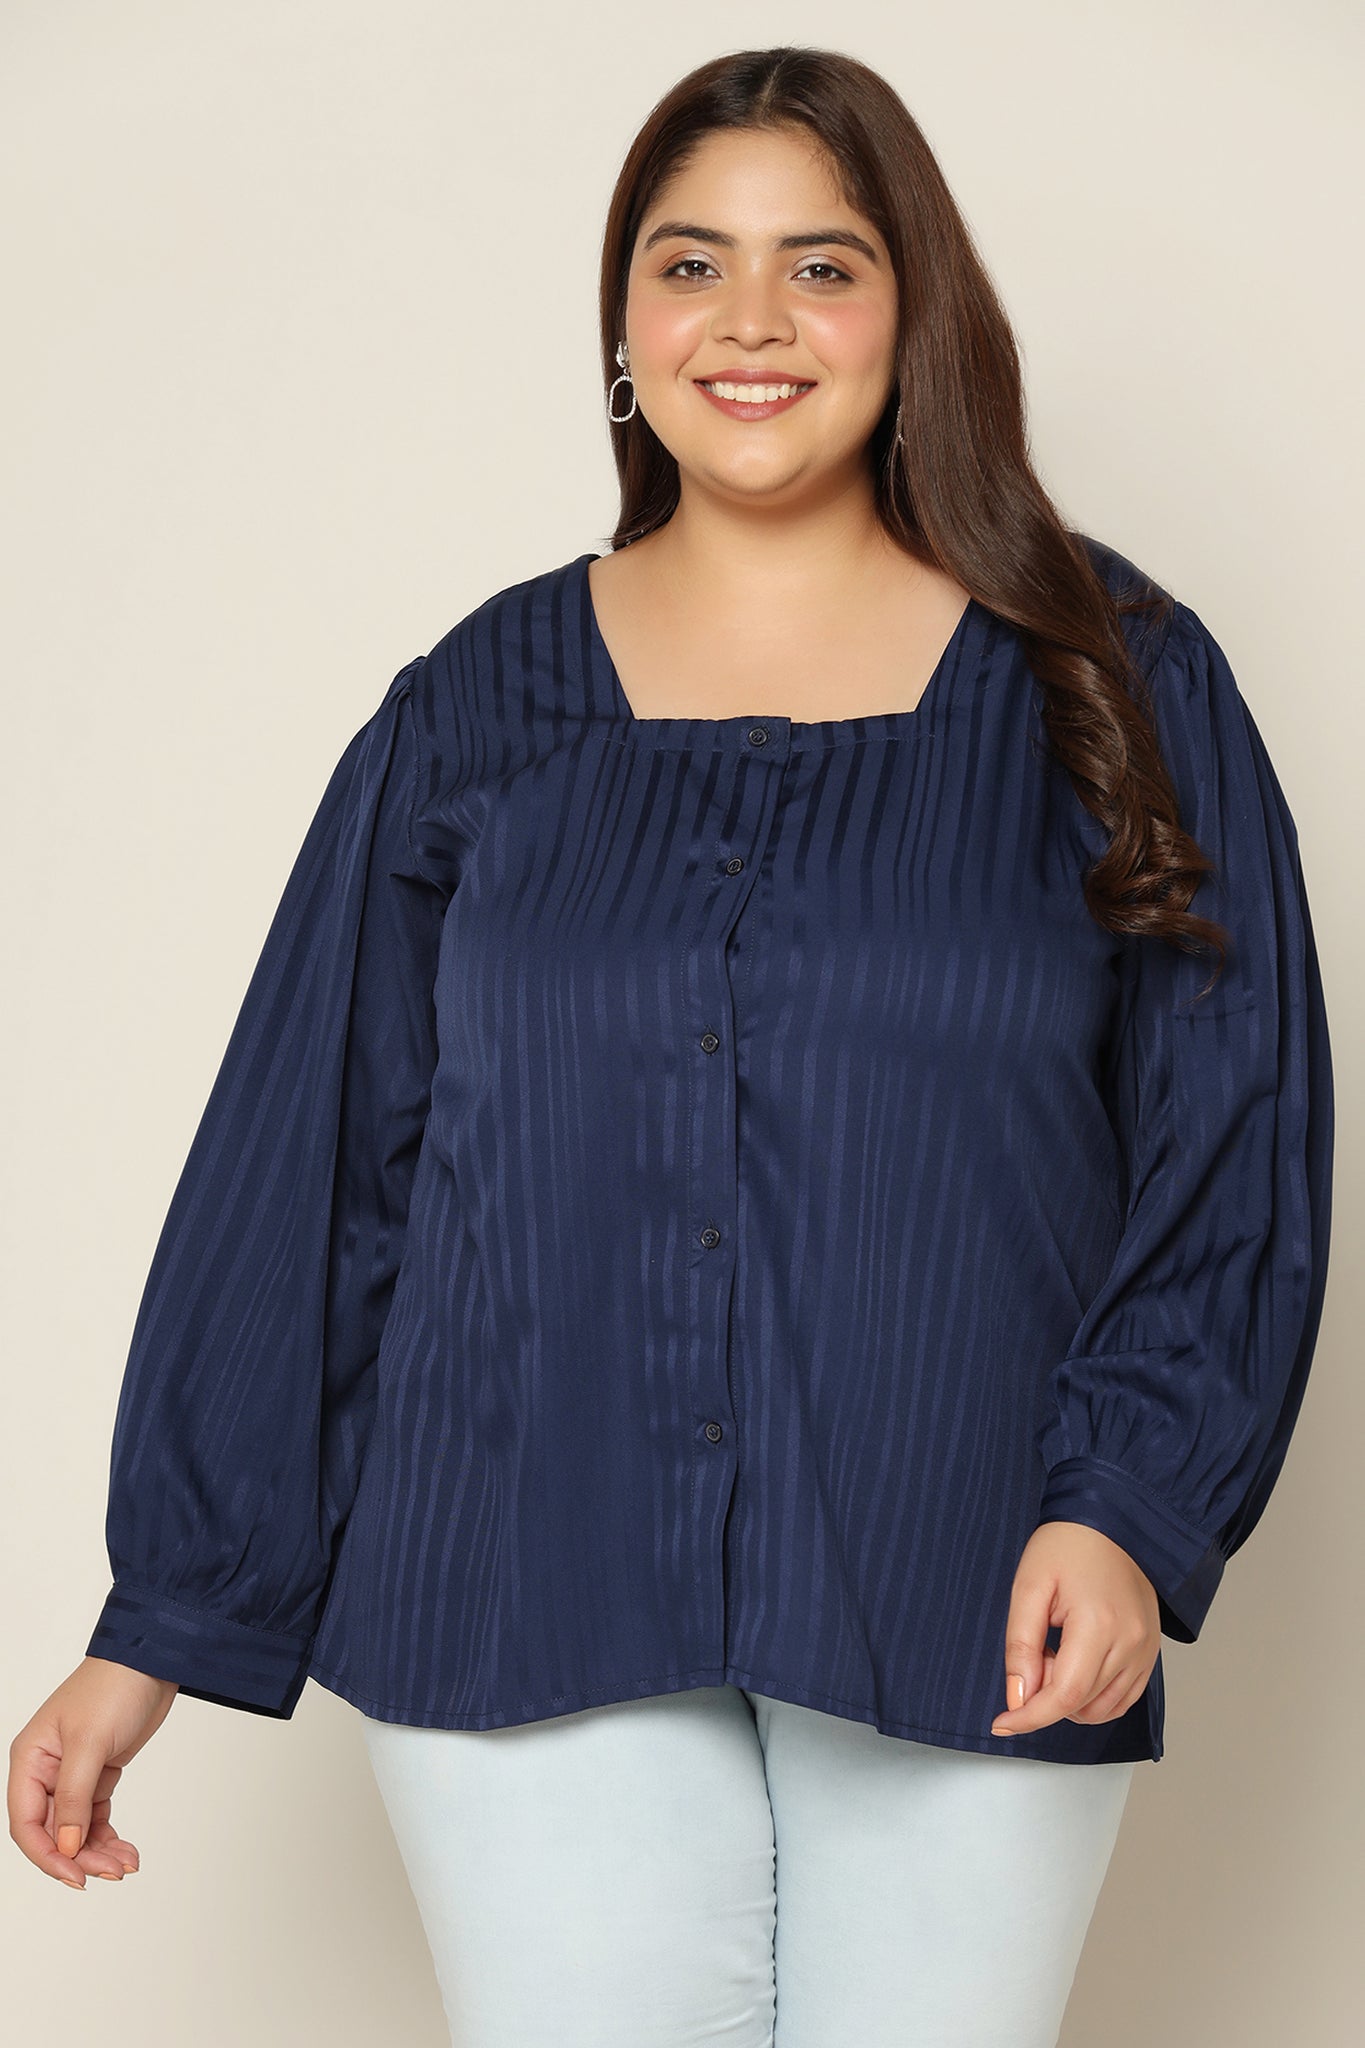 Women's Plus Size Navy Blue Striped Puff Sleeve Top